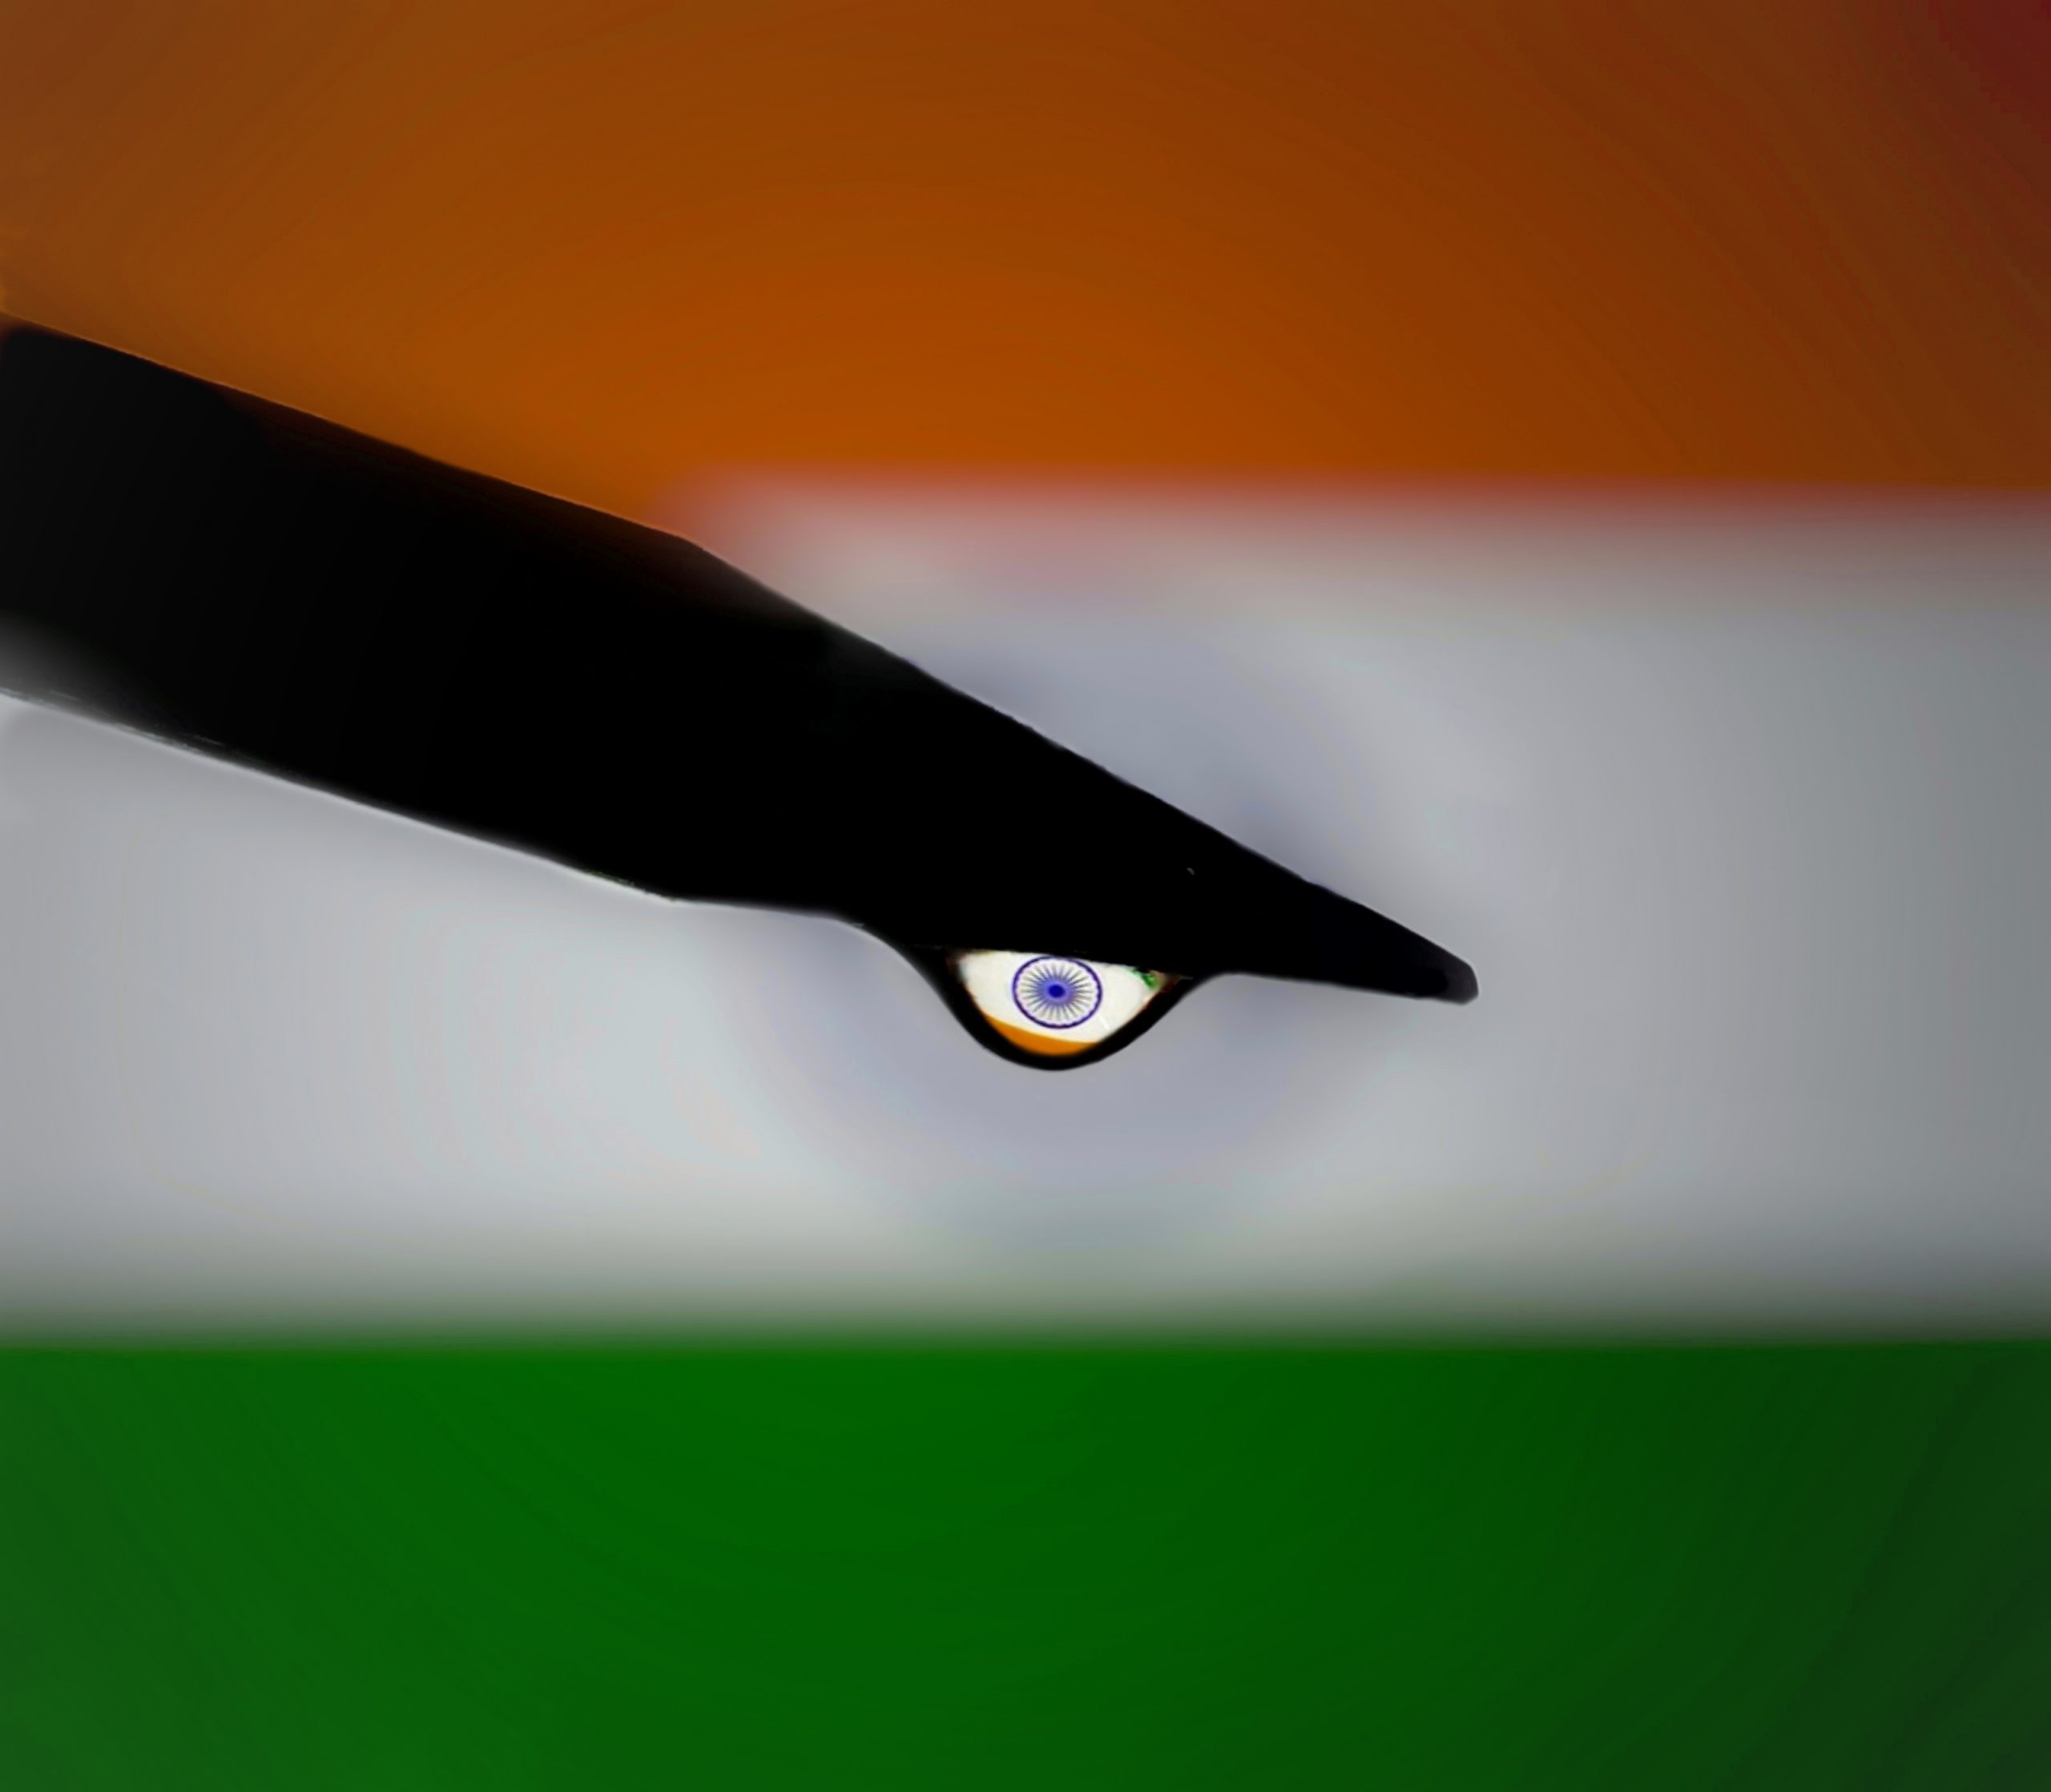 Reflection of national flag in a drop